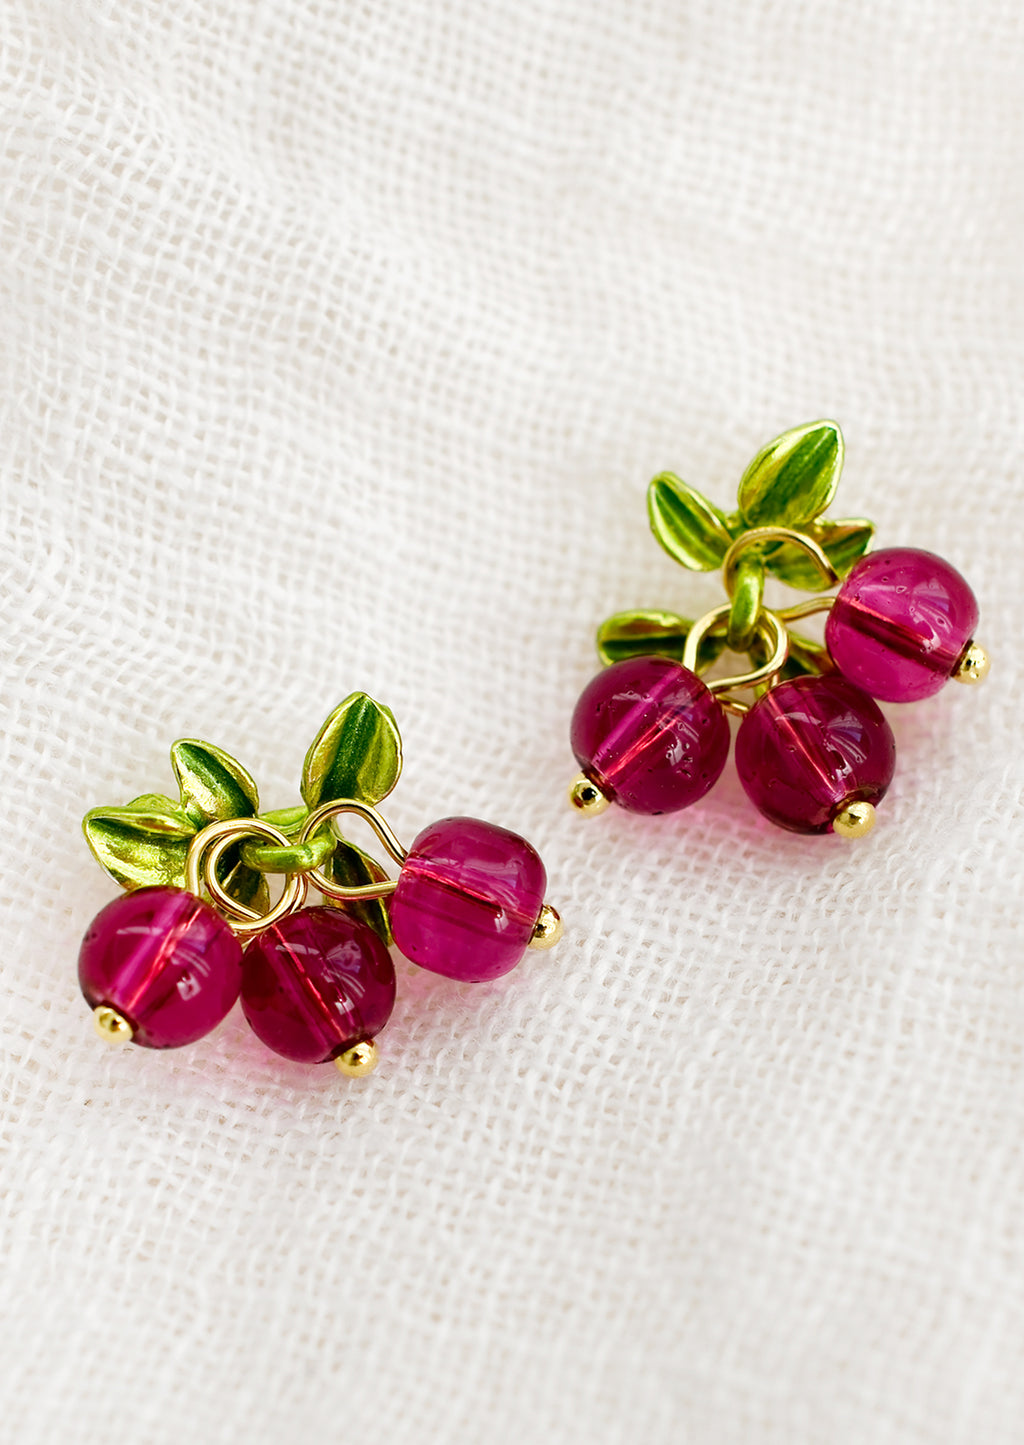 Cranberry: A pair of earrings made to resemble cranberries, made with round pink beads.